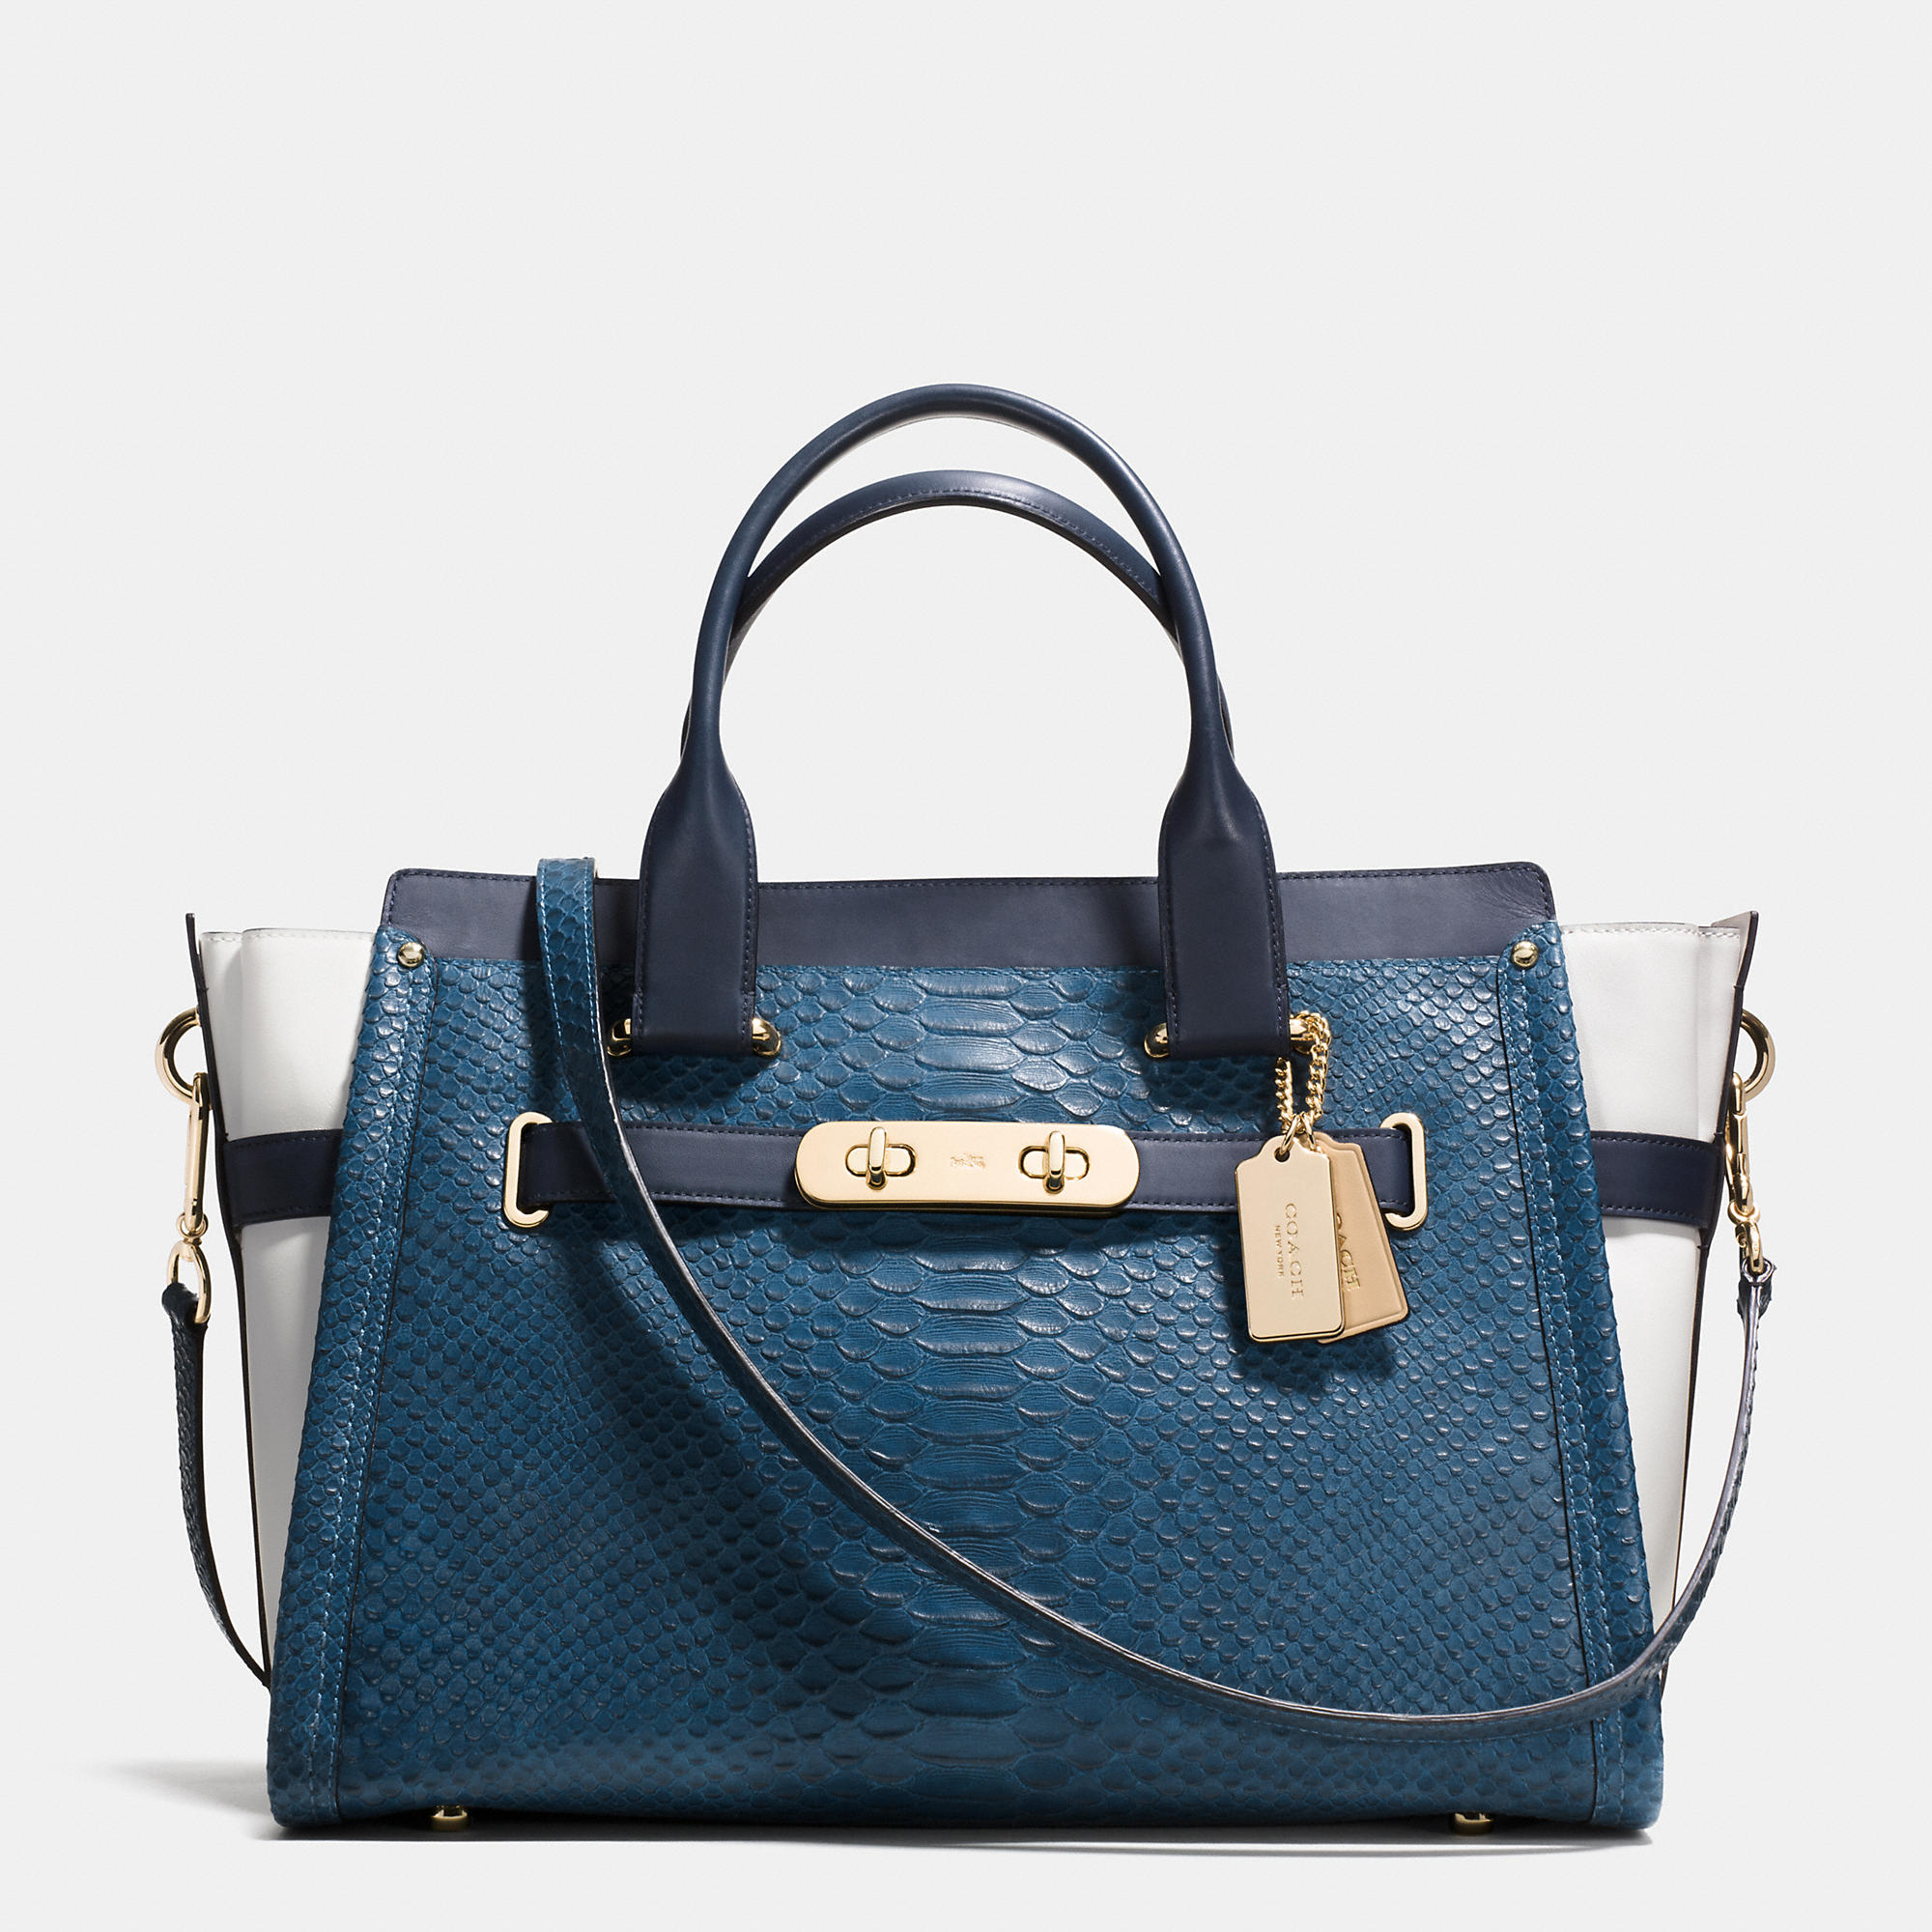 Lyst - Coach Swagger 37 In Colorblock Python Embossed Leather in Blue